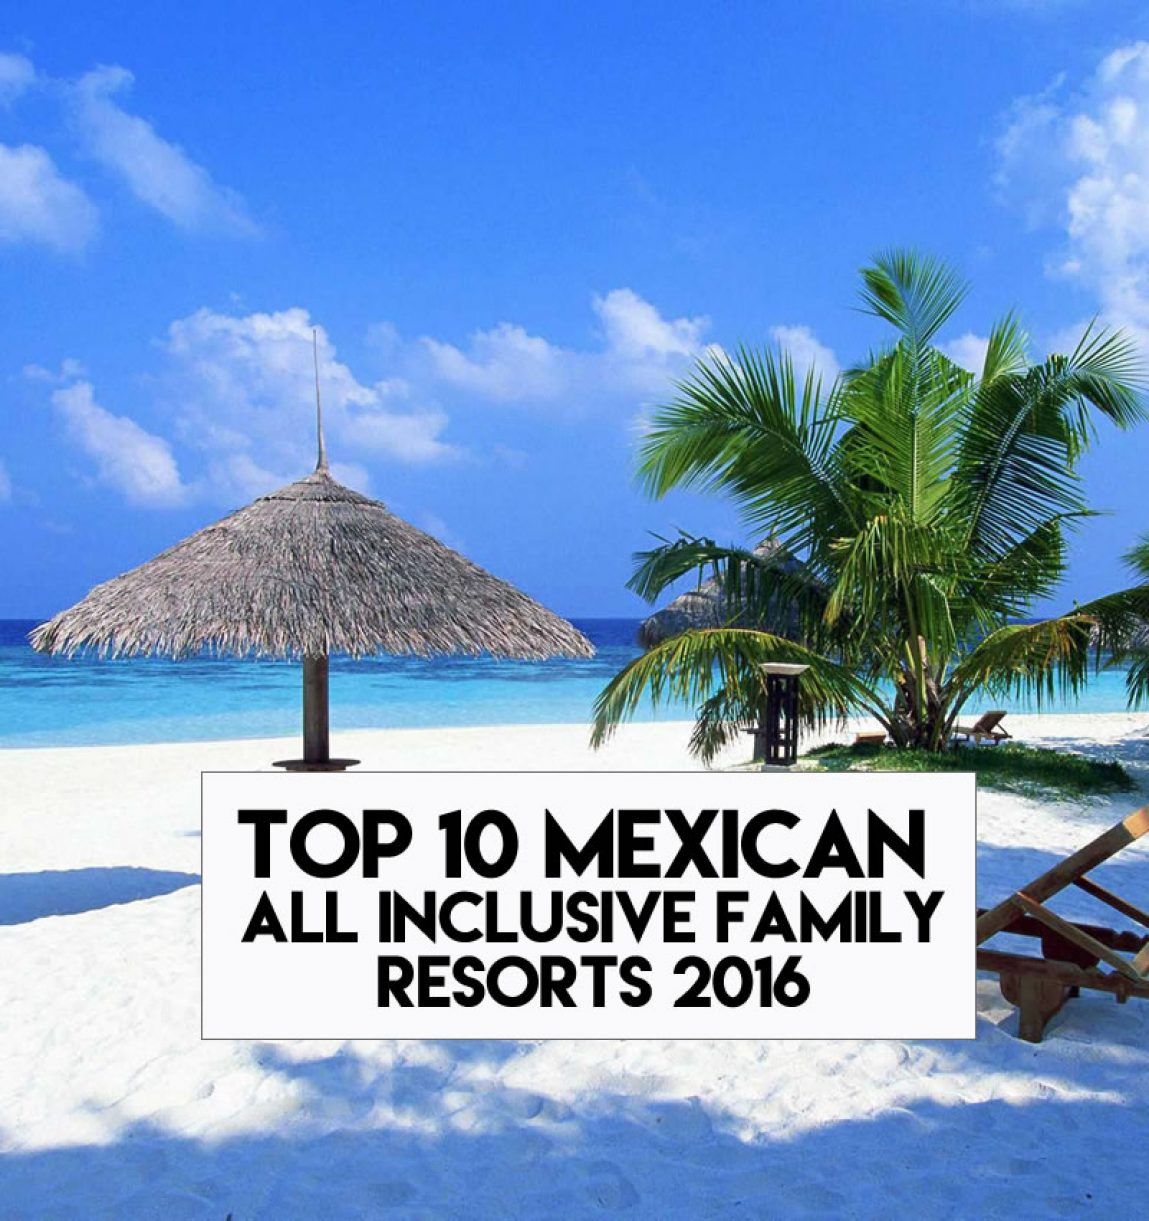 The 12 Best All Inclusive Family Resorts in Mexico